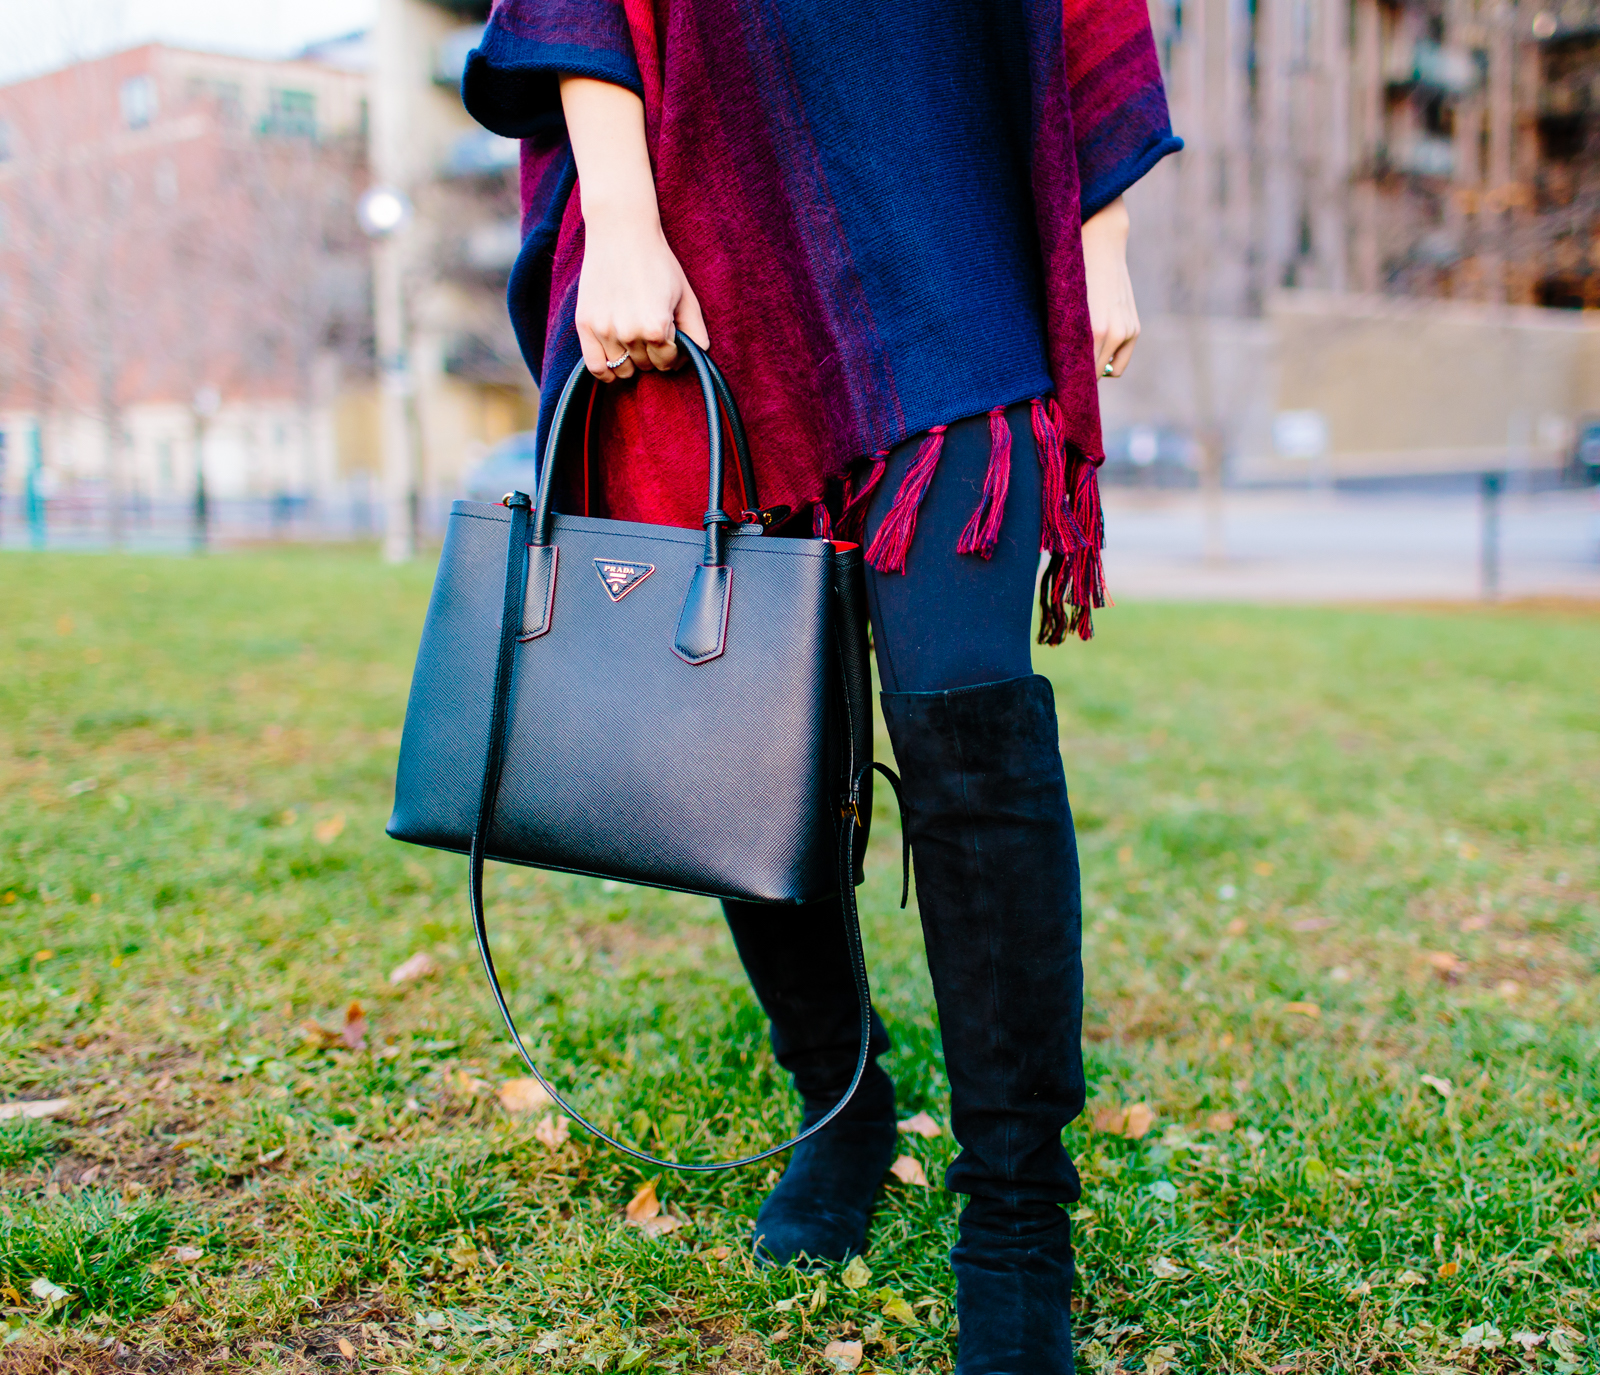 Ombre Sweater and Strathberry Bag - Tia Perciballi